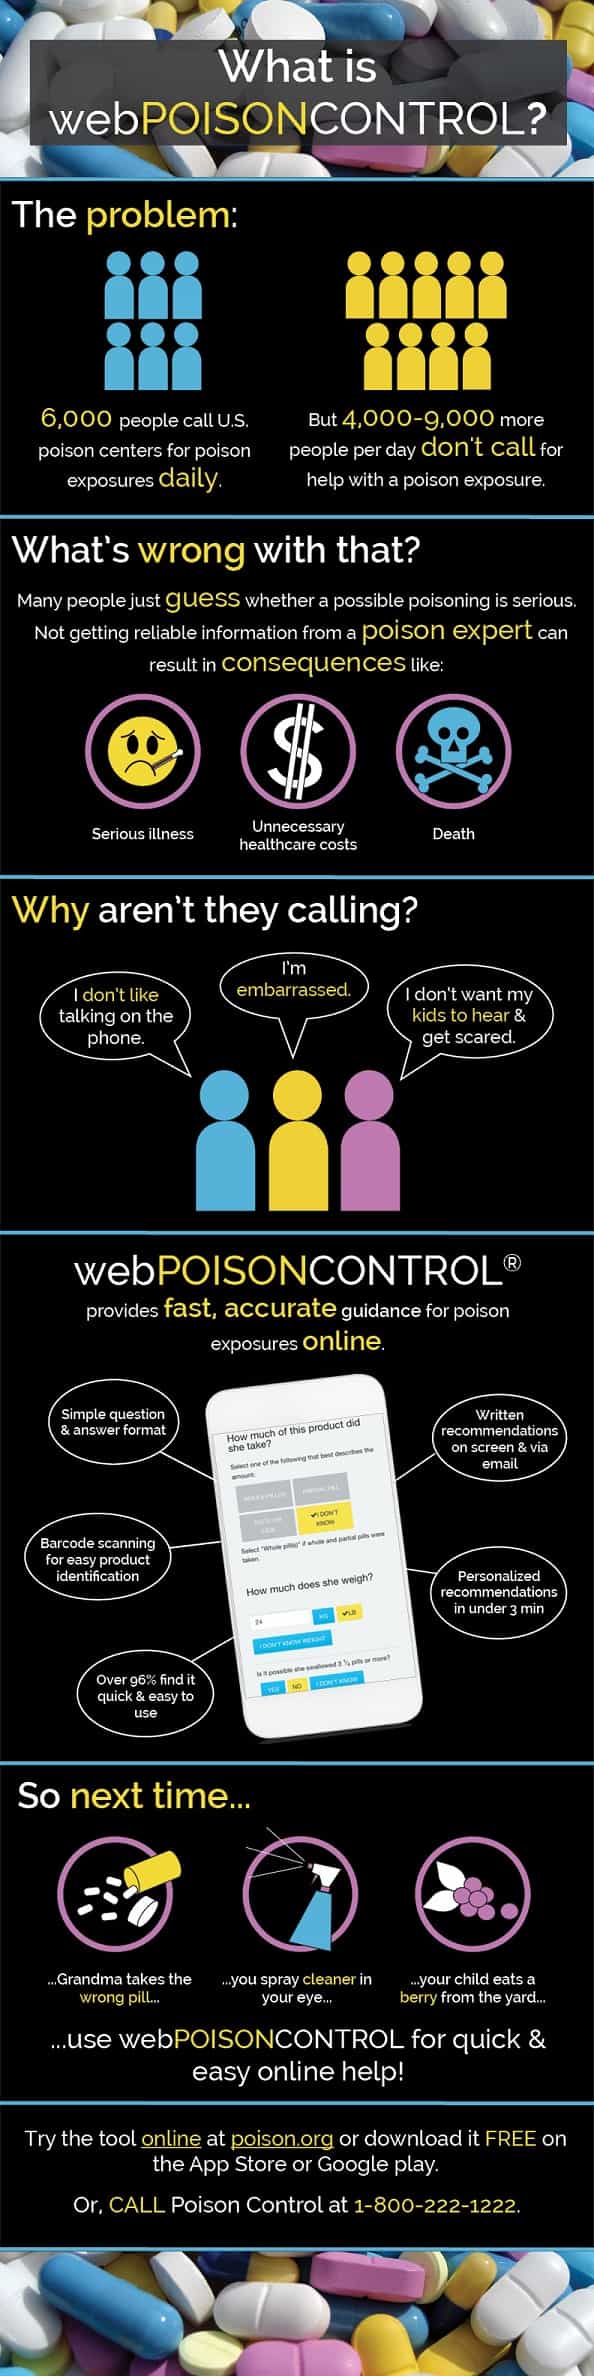 what is webPOISONCONTROL infographic